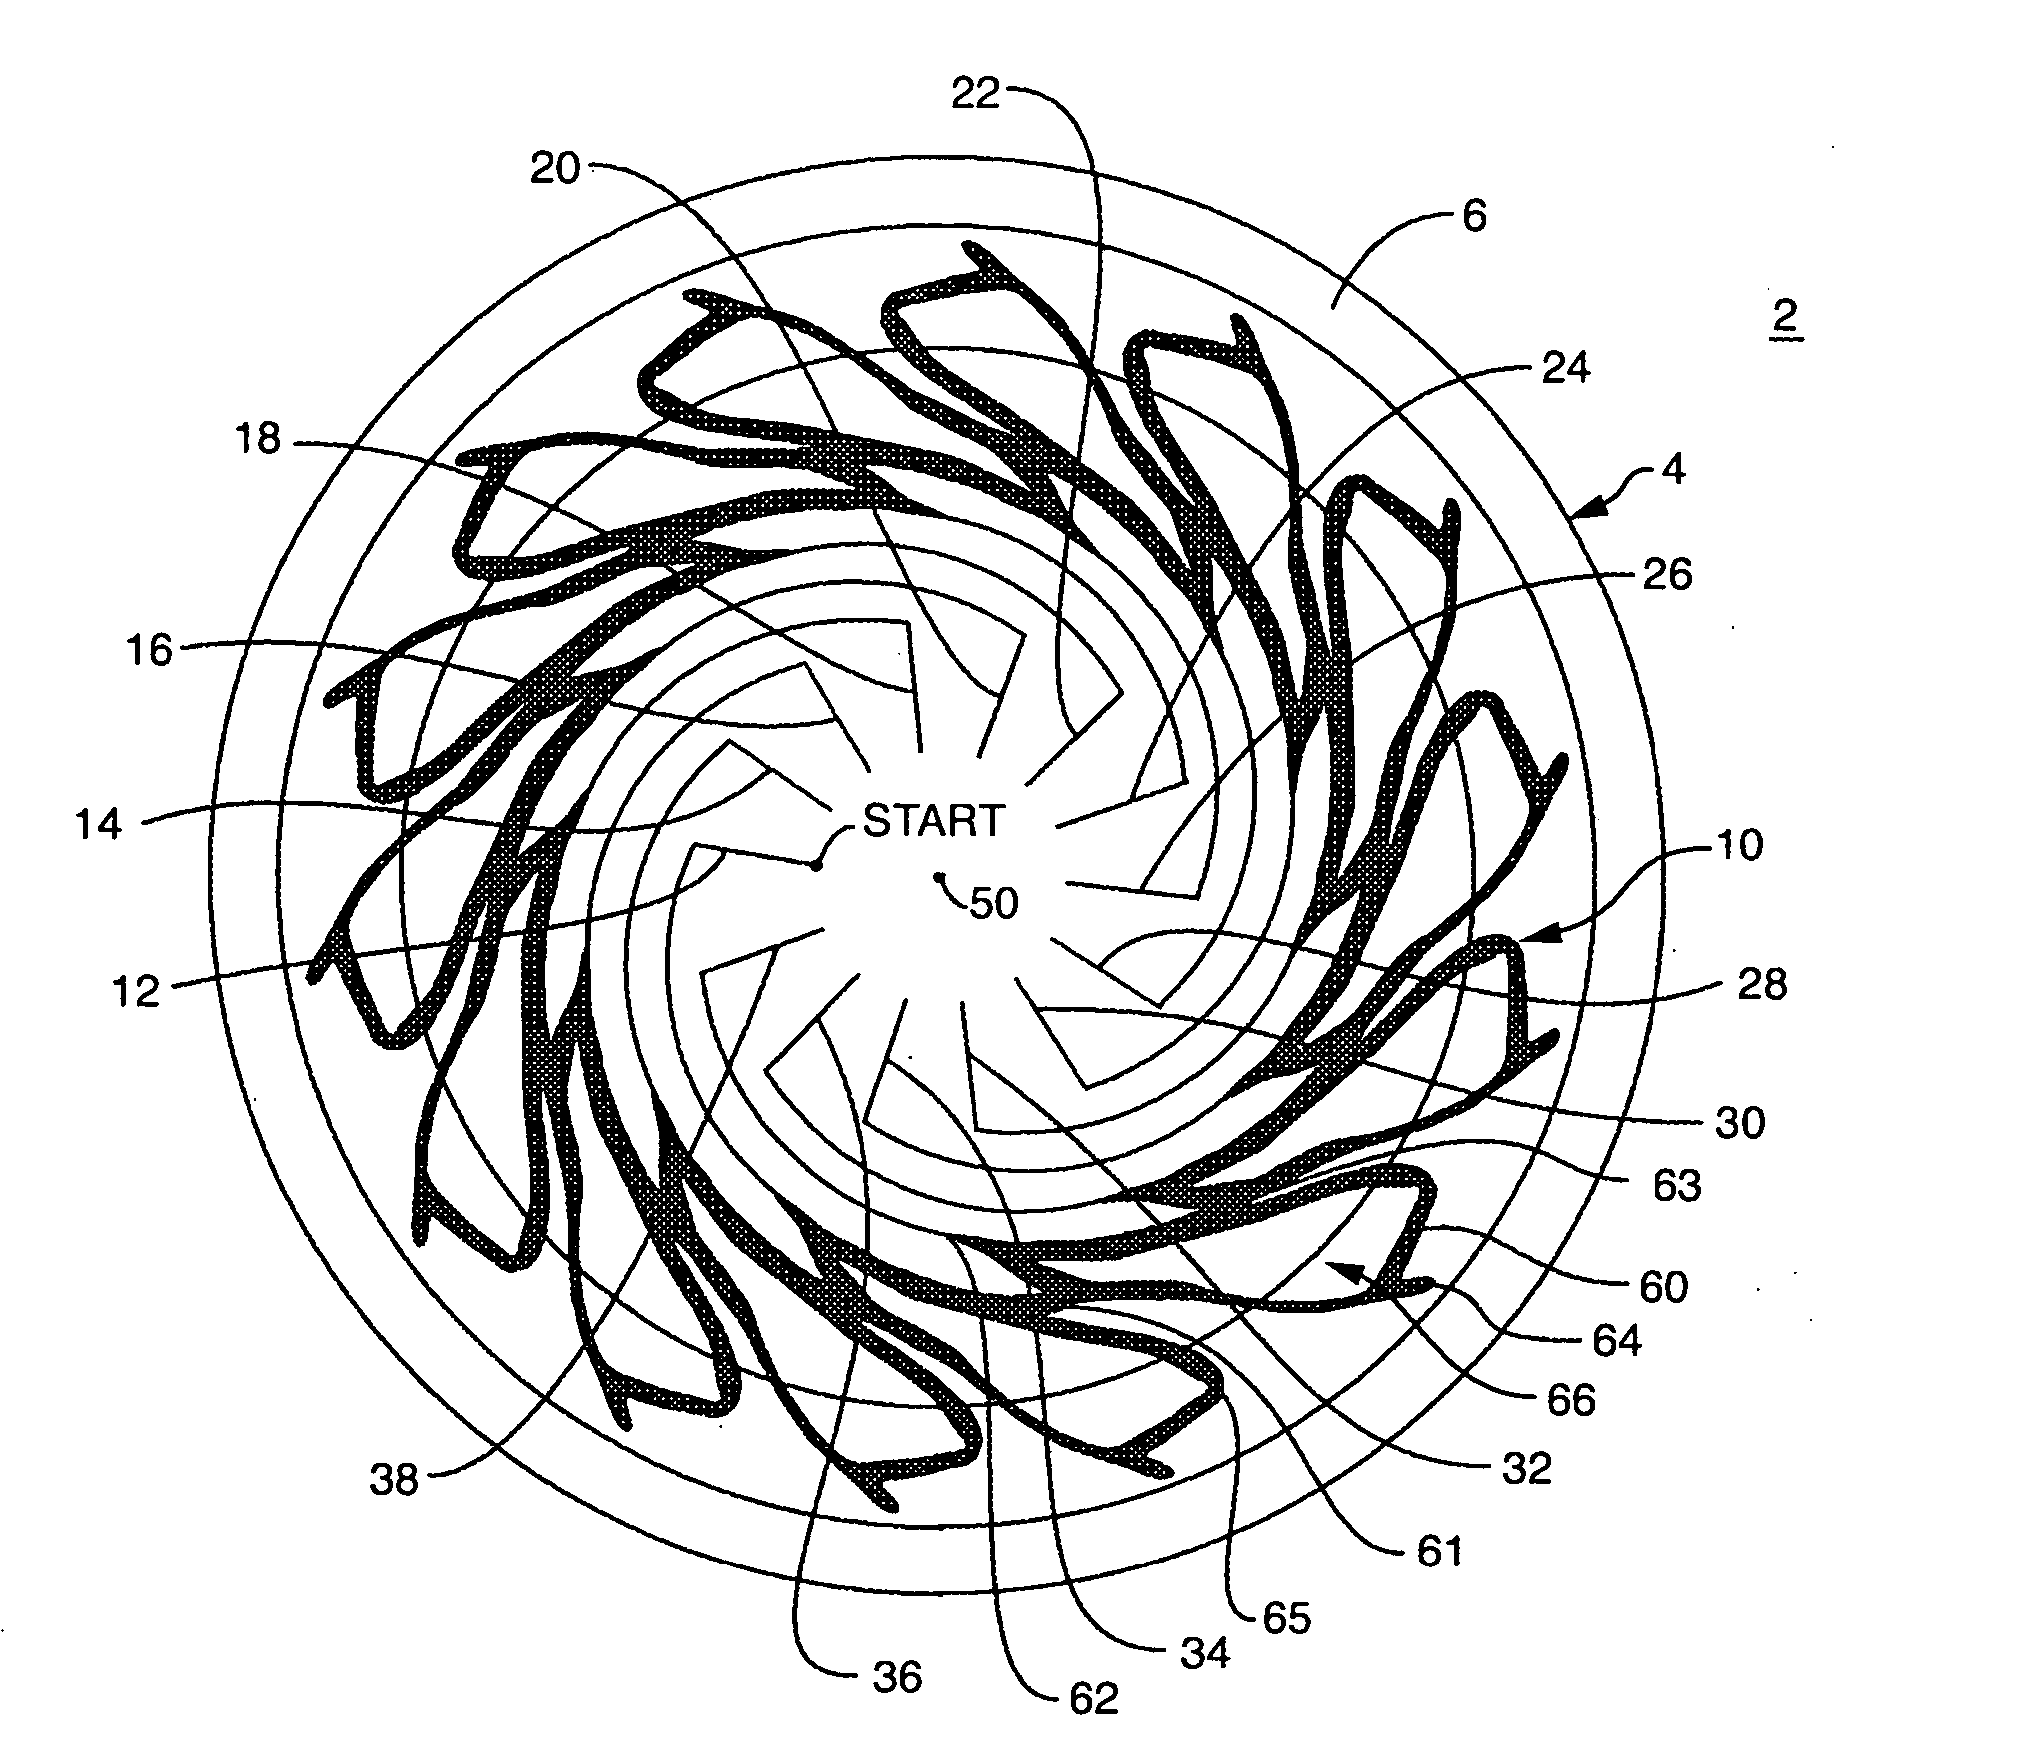 Leaky wave antenna with radiating structure including fractal loops